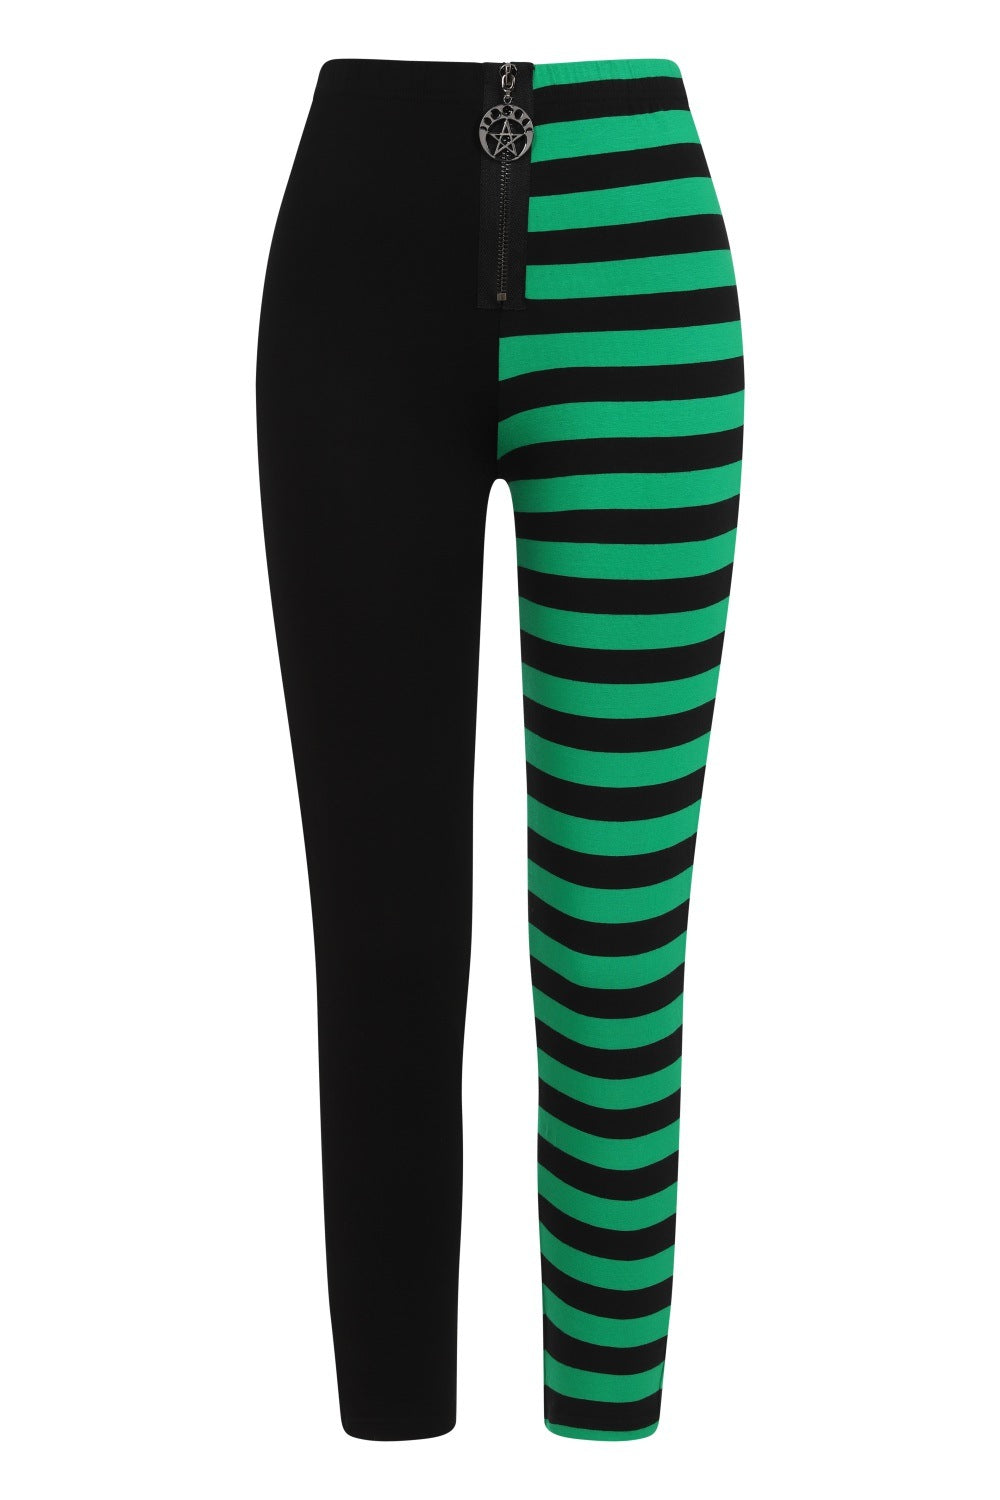 High waisted leggings with one striped green leg and zip waist